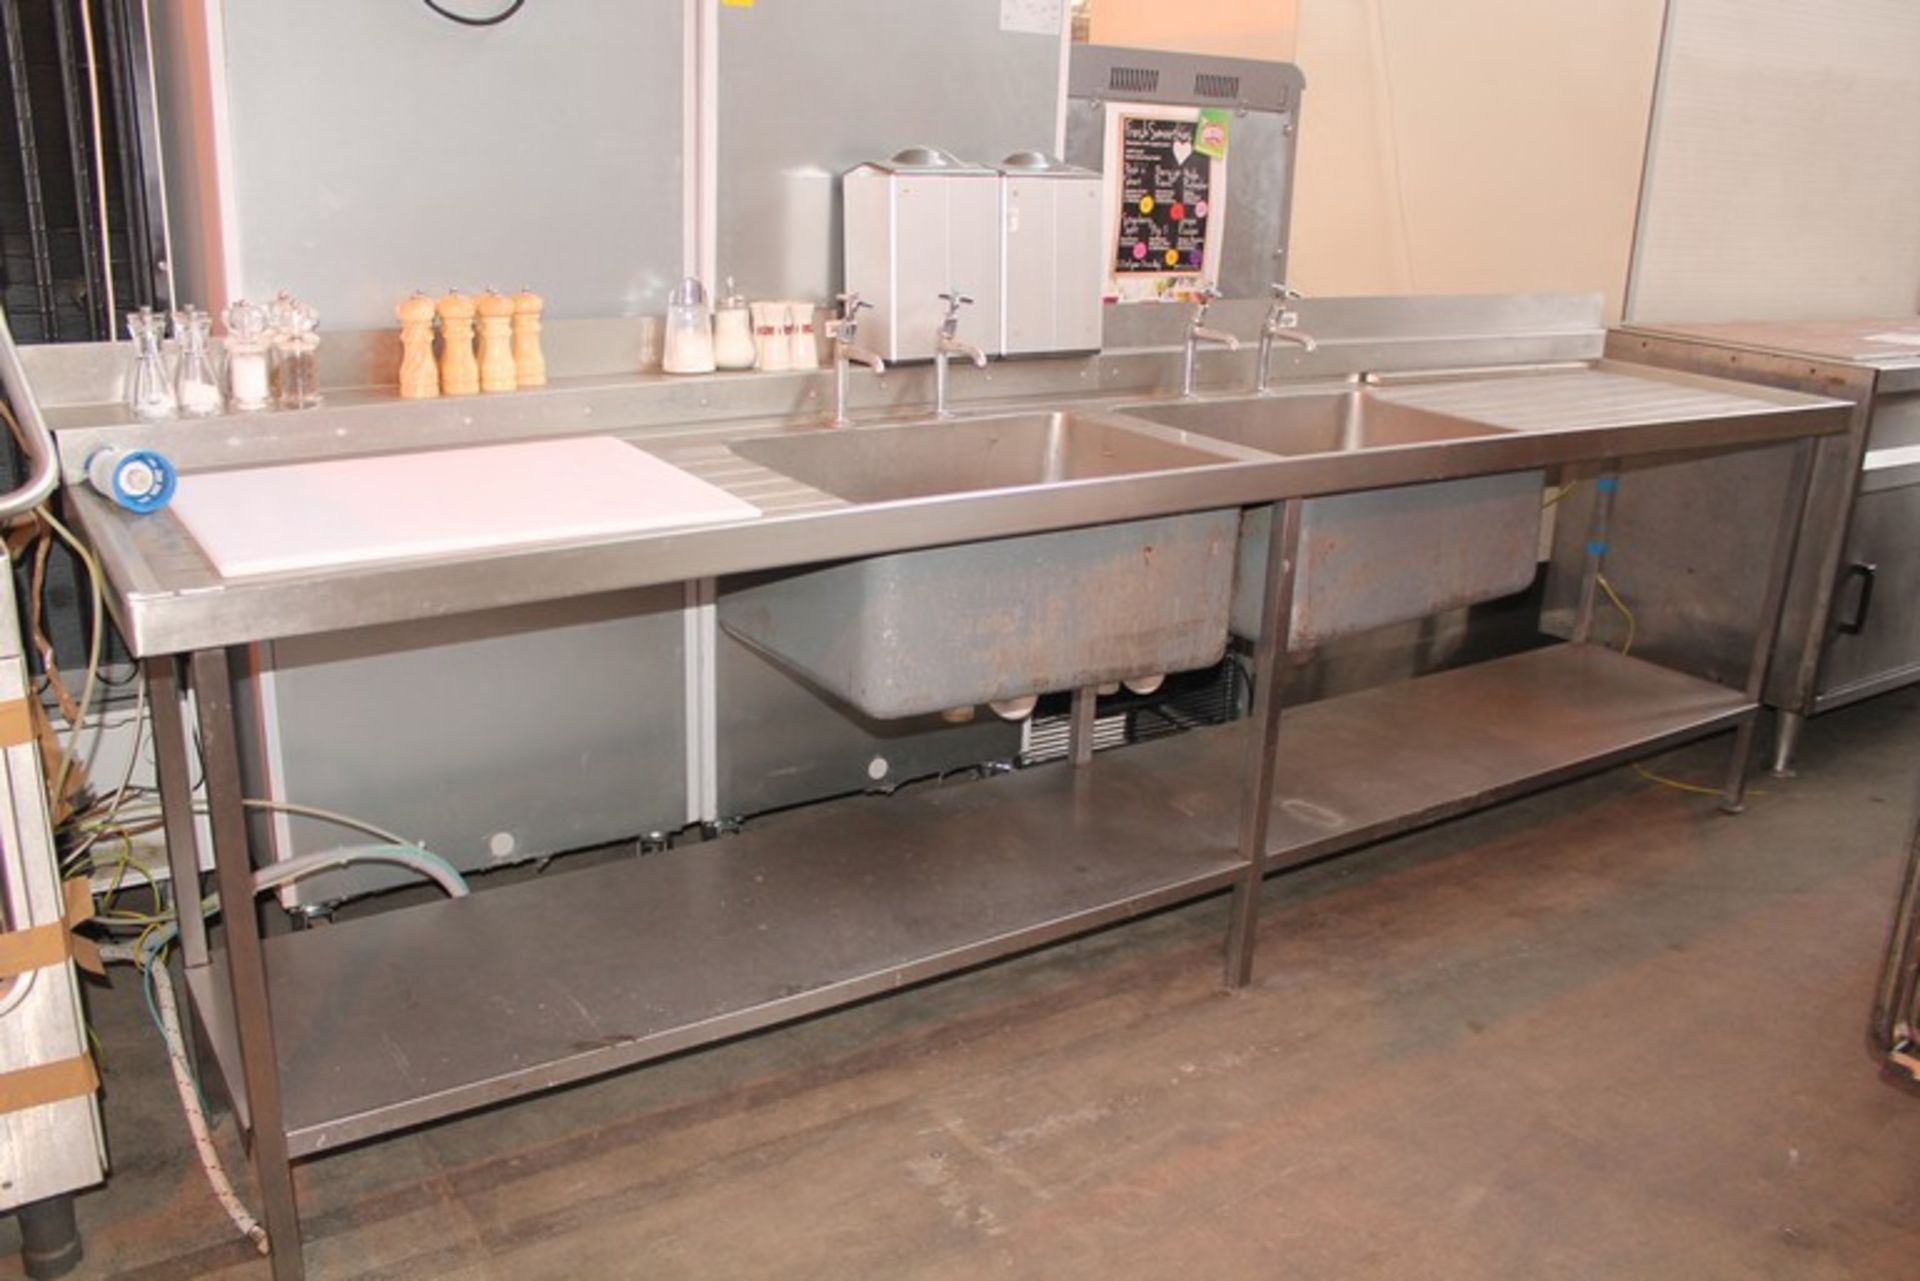 ONE BRUSHED STEEL DOUBLE SINK INDUSTRIAL UNIT APPROX 2.5M (CATERING)